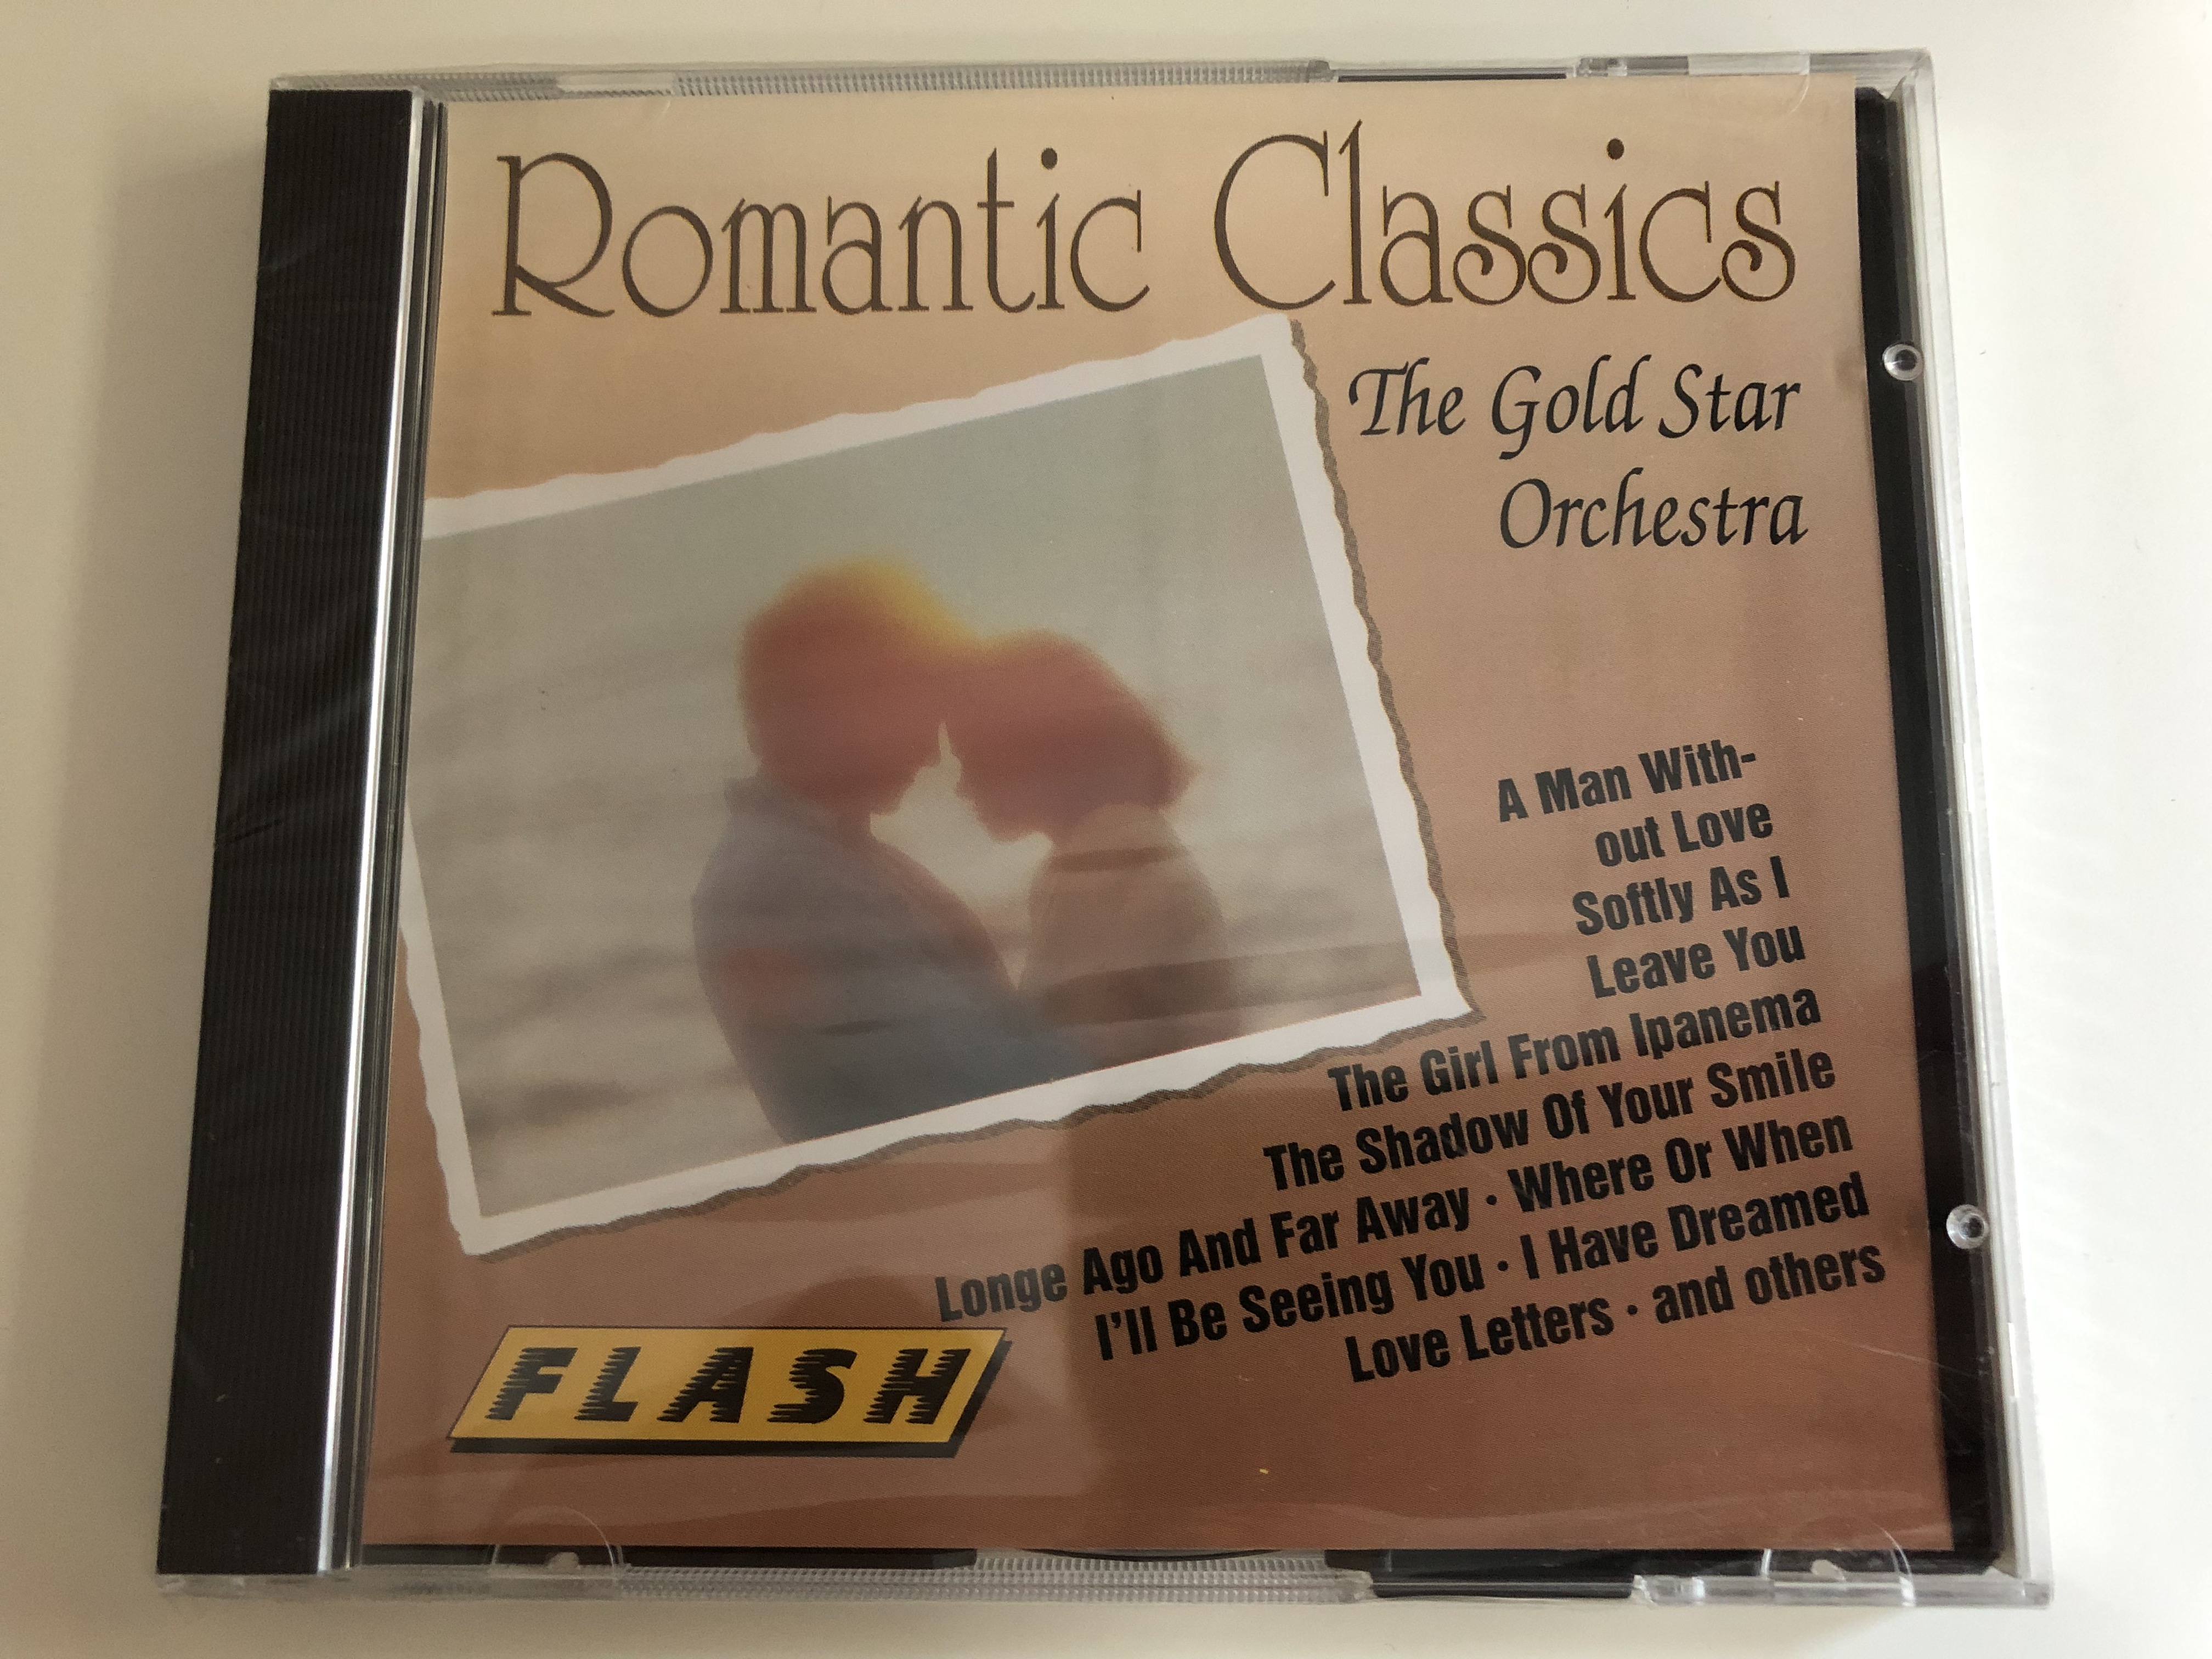 romantic-classics-the-gold-star-orchestra-a-man-without-love-softly-as-i-leave-you-the-girl-from-ipanema-the-shadow-of-your-smile-long-ago-and-far-away-where-or-when-i-ll-be-seeing-you-1-.jpg